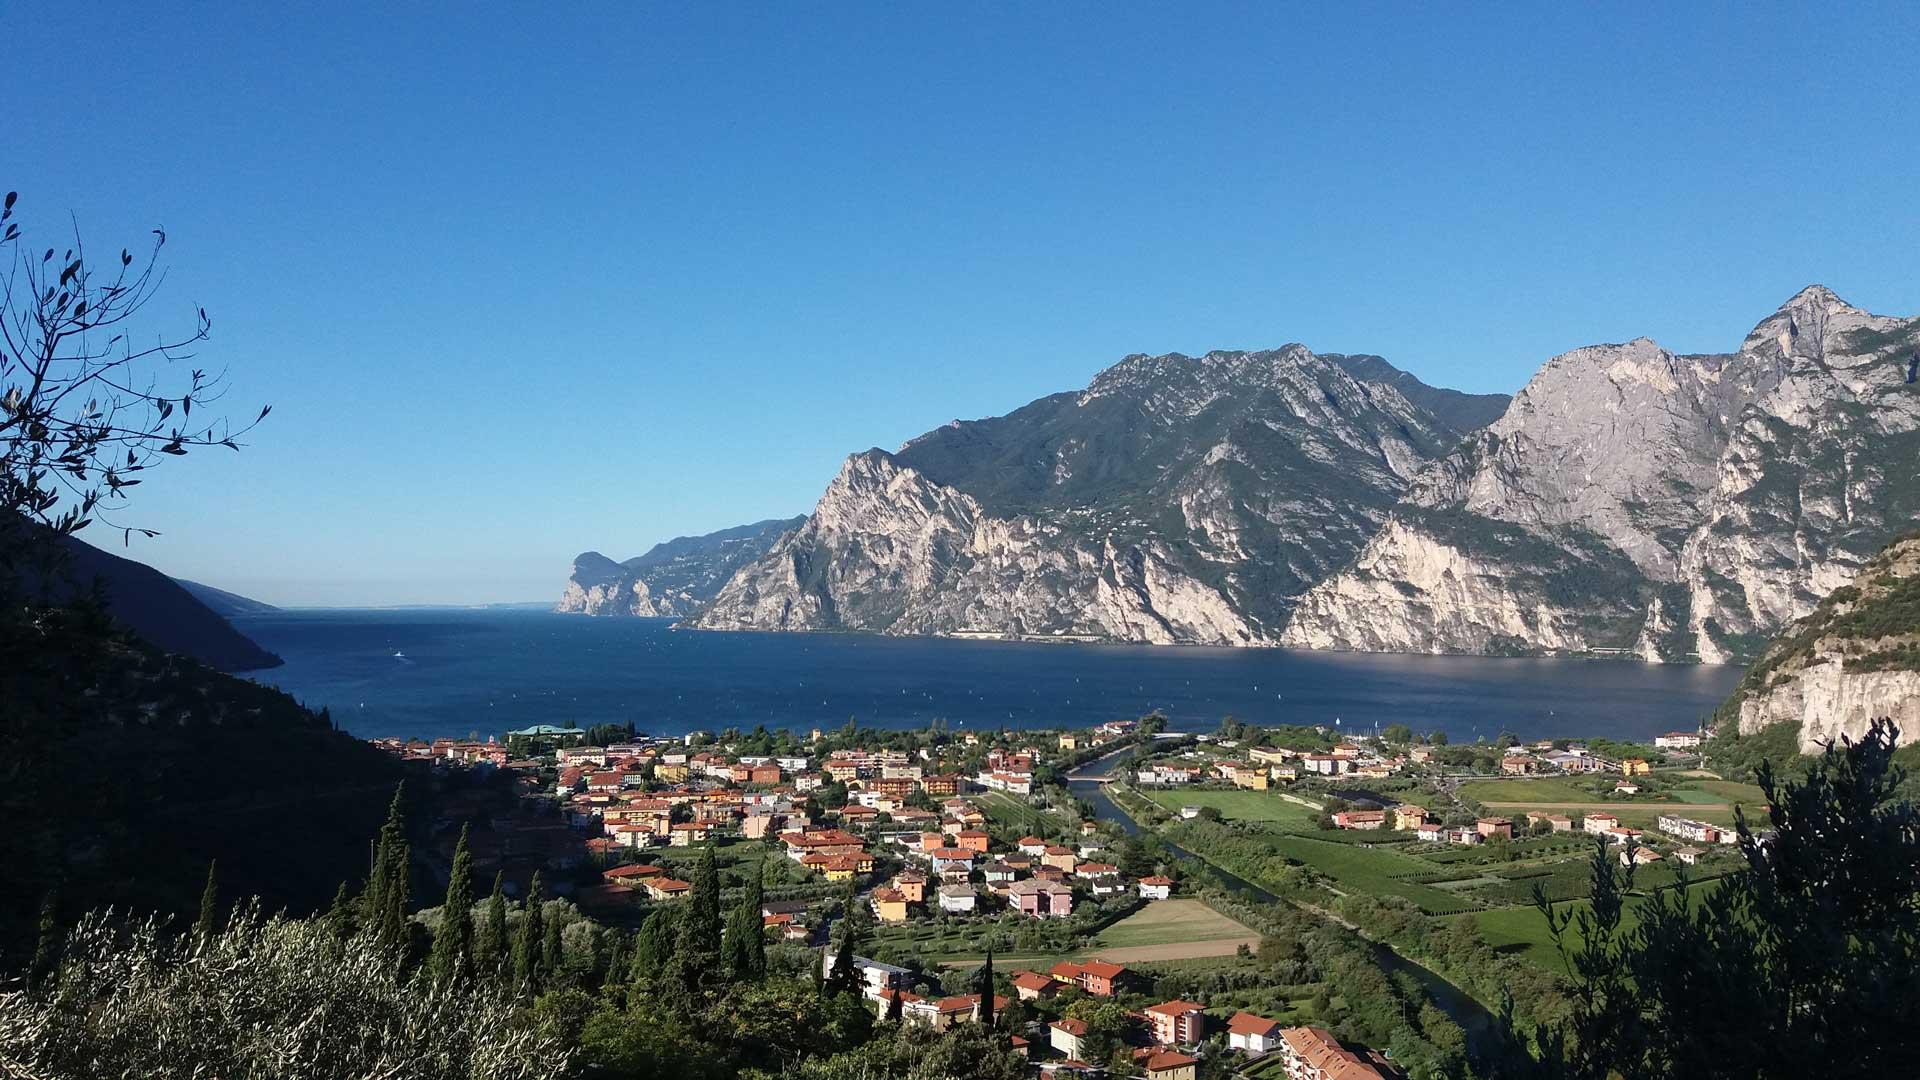 epochehotel.upgarda en special-offer-july-on-lake-garda-with-private-beach 012